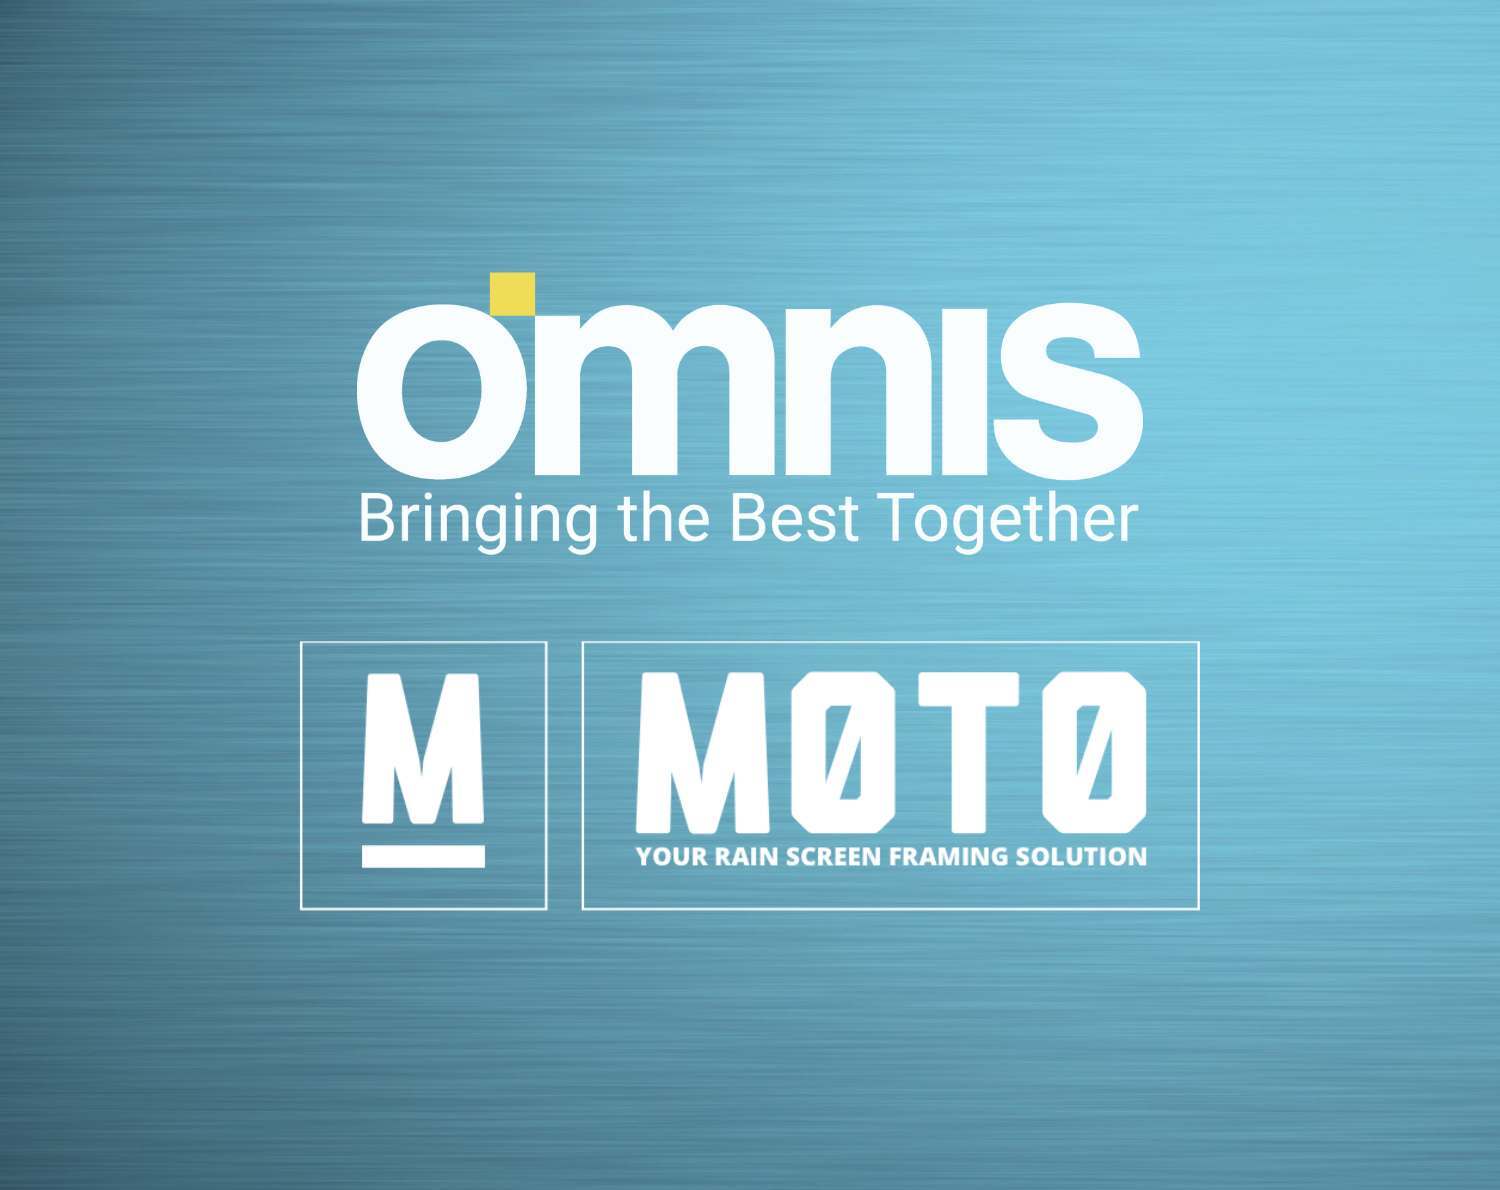 Omnis Partners with Rainscreen Framing System MOTO Extrusions